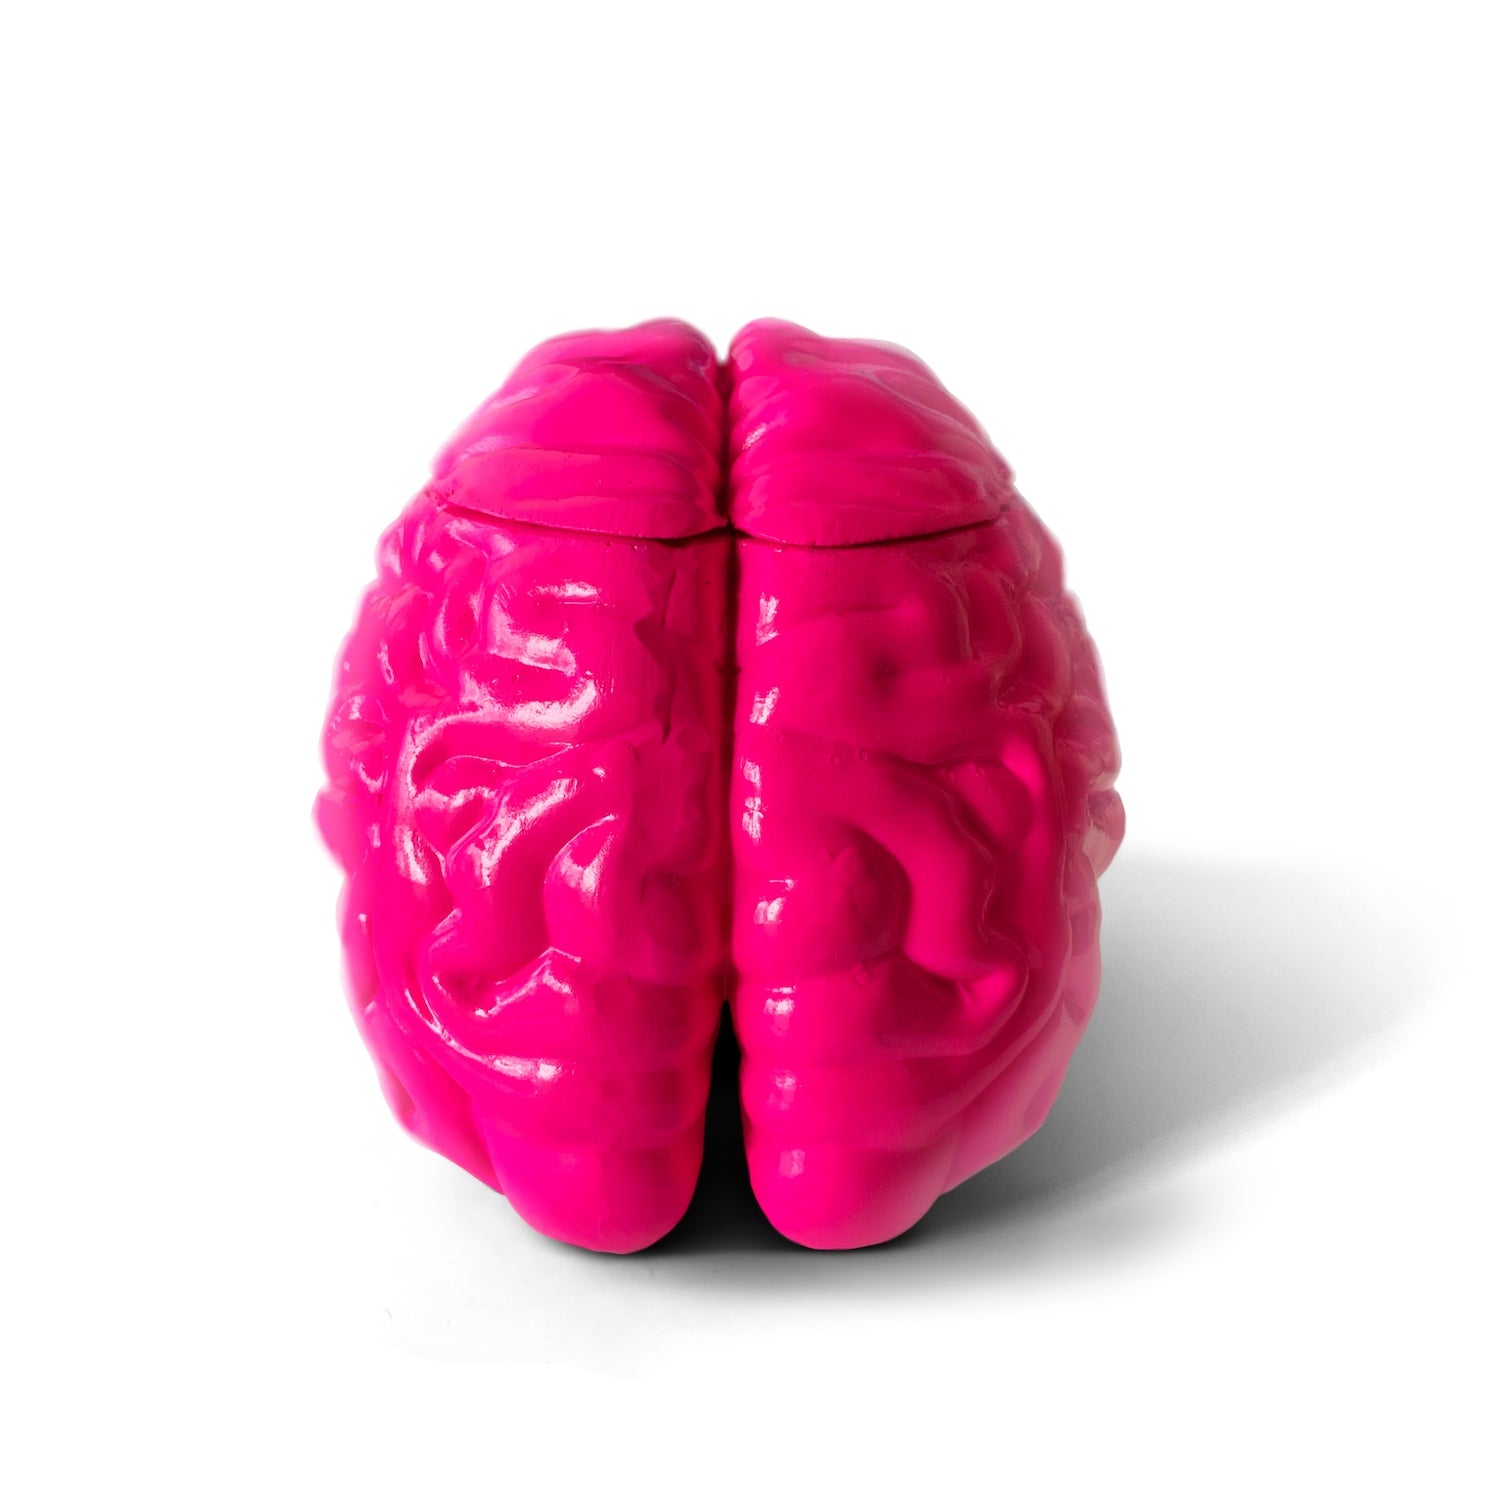 Scatter Brain (Pink) | Limited Edition Collectible by Sid G (toosid)